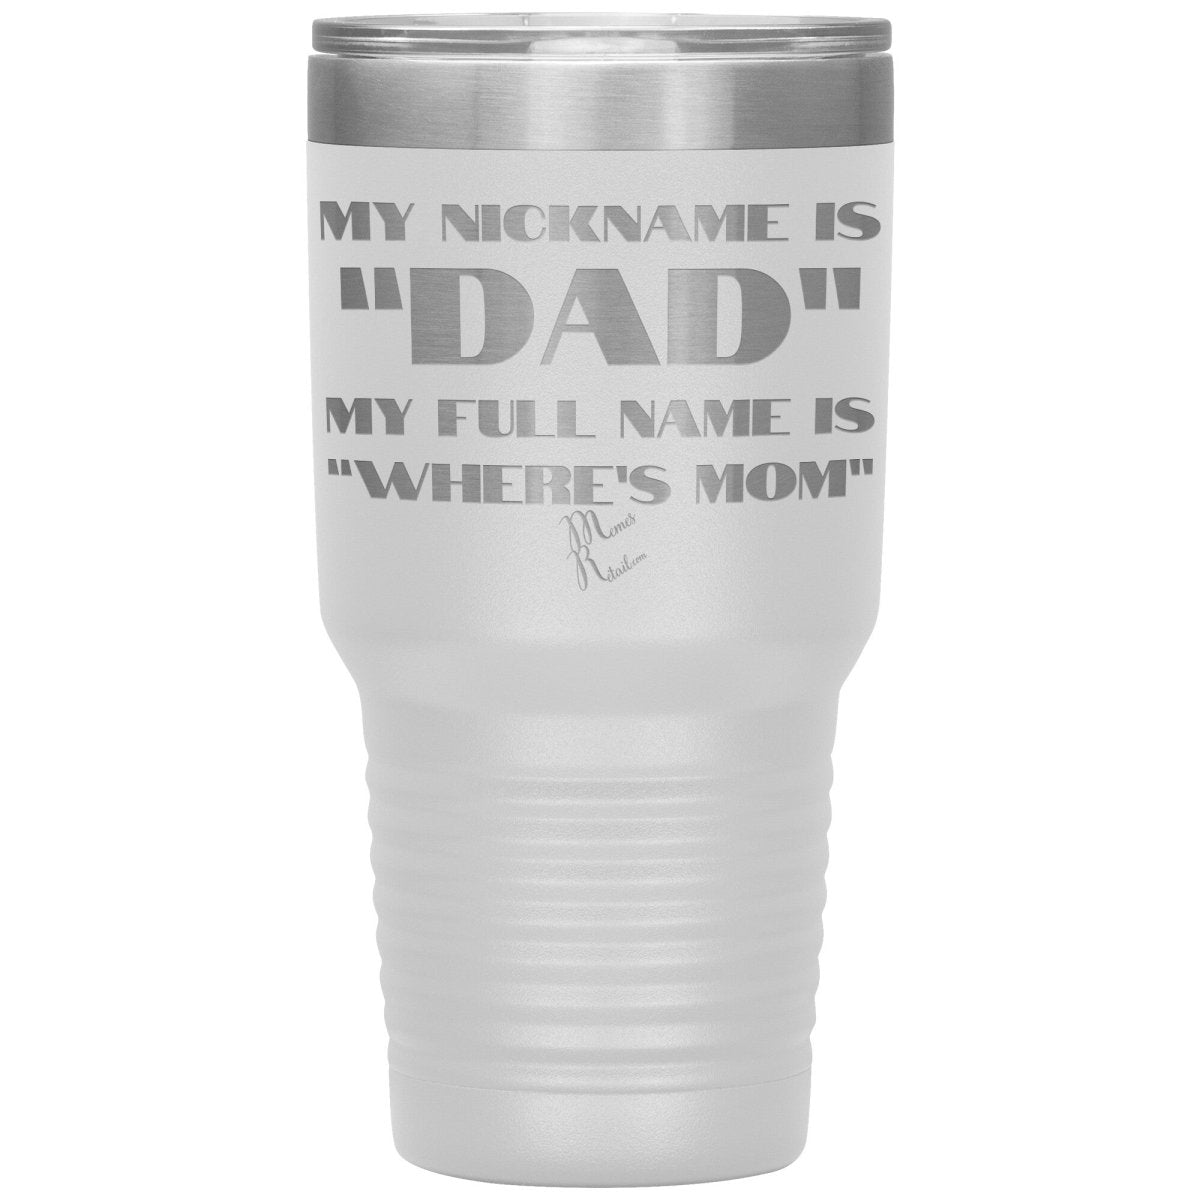 My Nickname is "Dad", My Full Name is "Where's Mom" Tumblers, 30oz Insulated Tumbler / White - MemesRetail.com